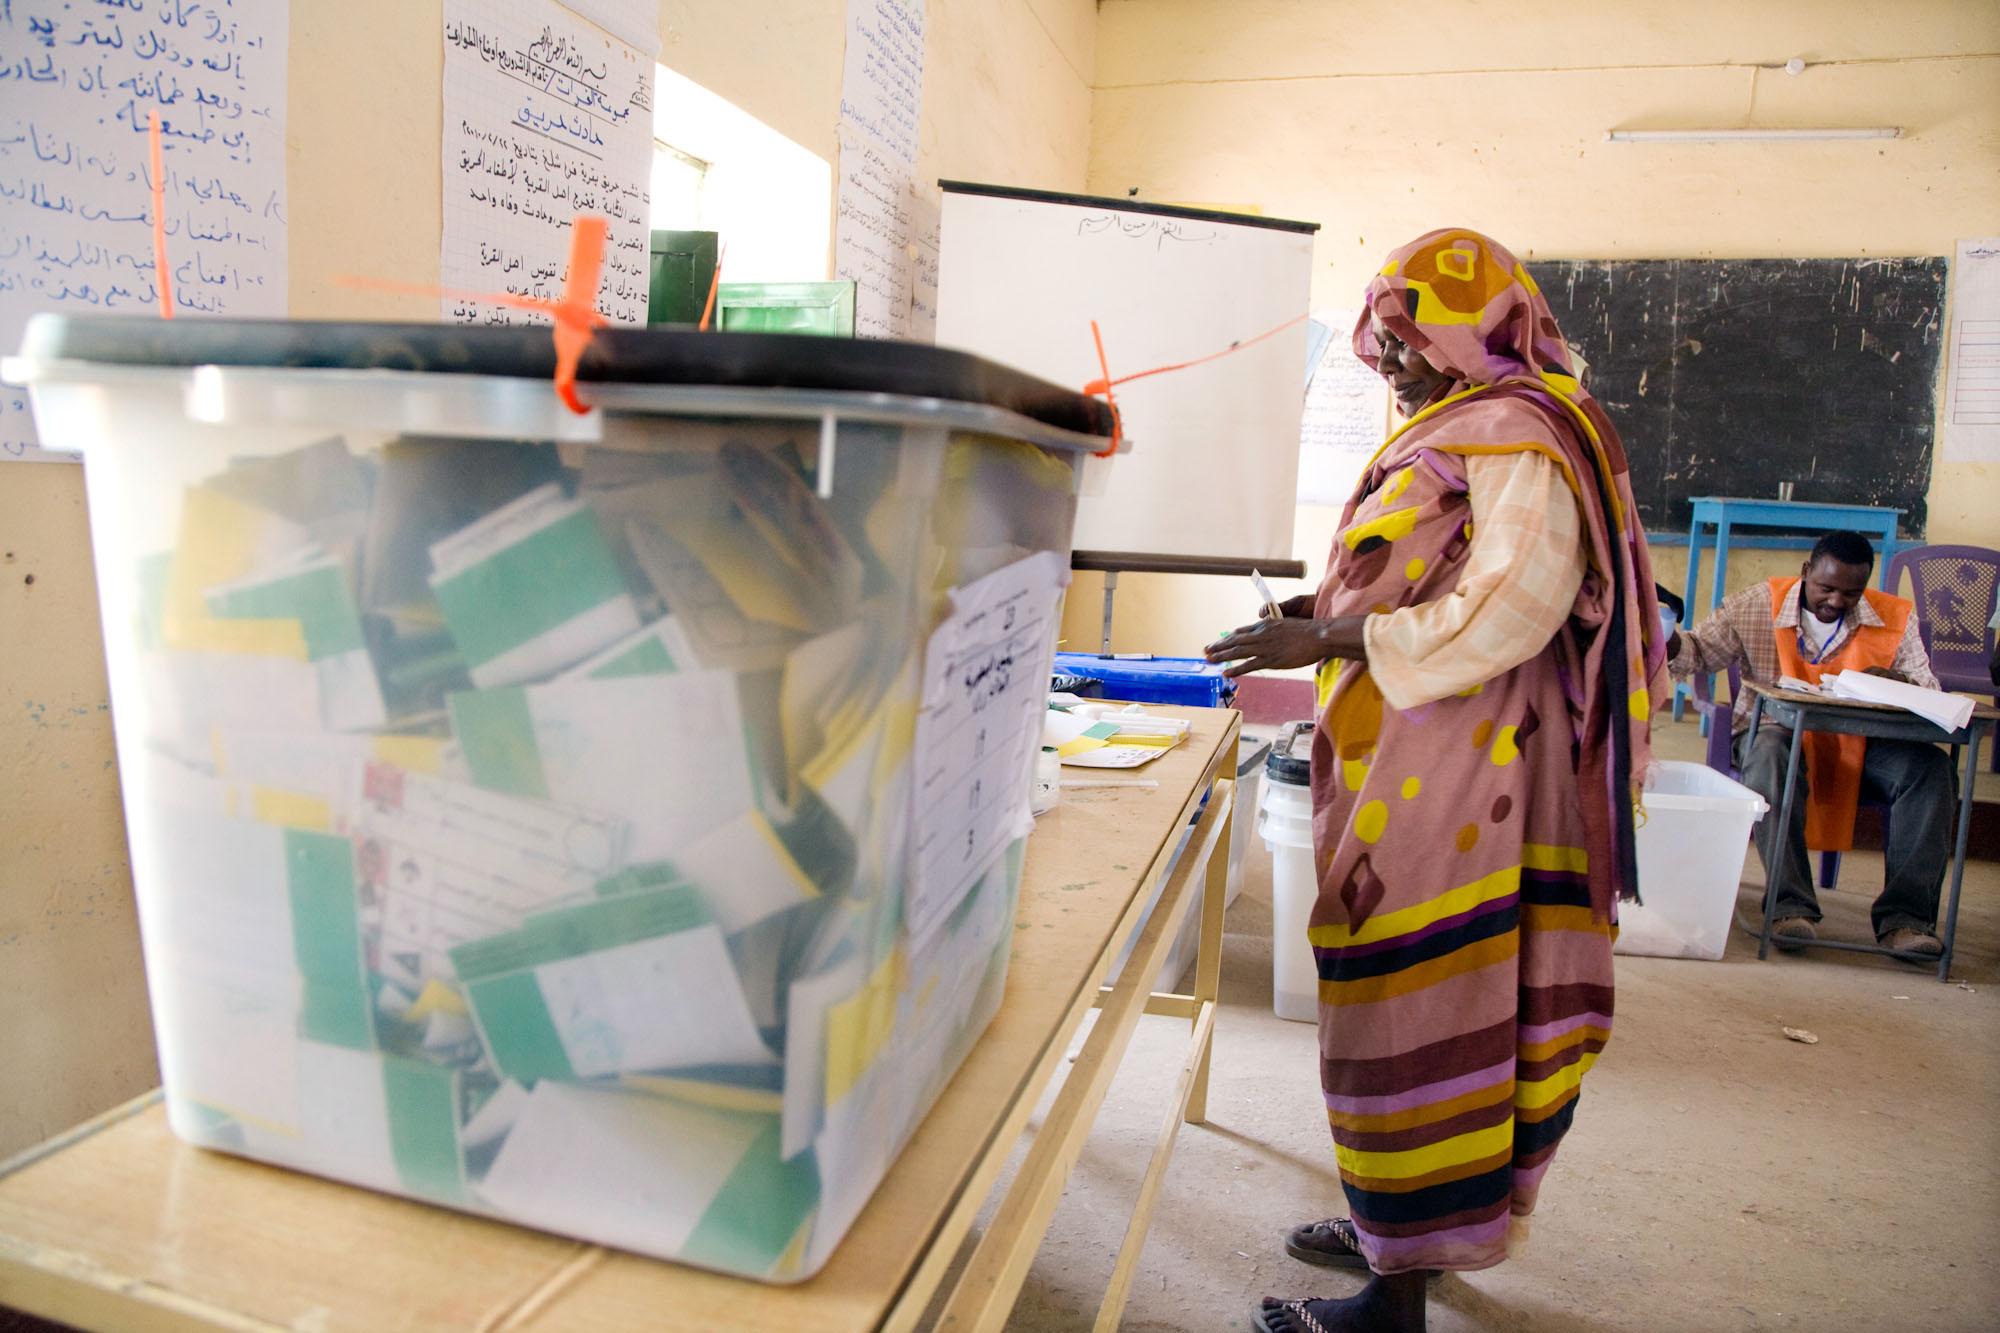 Promoting electoral integrity through aid: Analysis and advice for donors